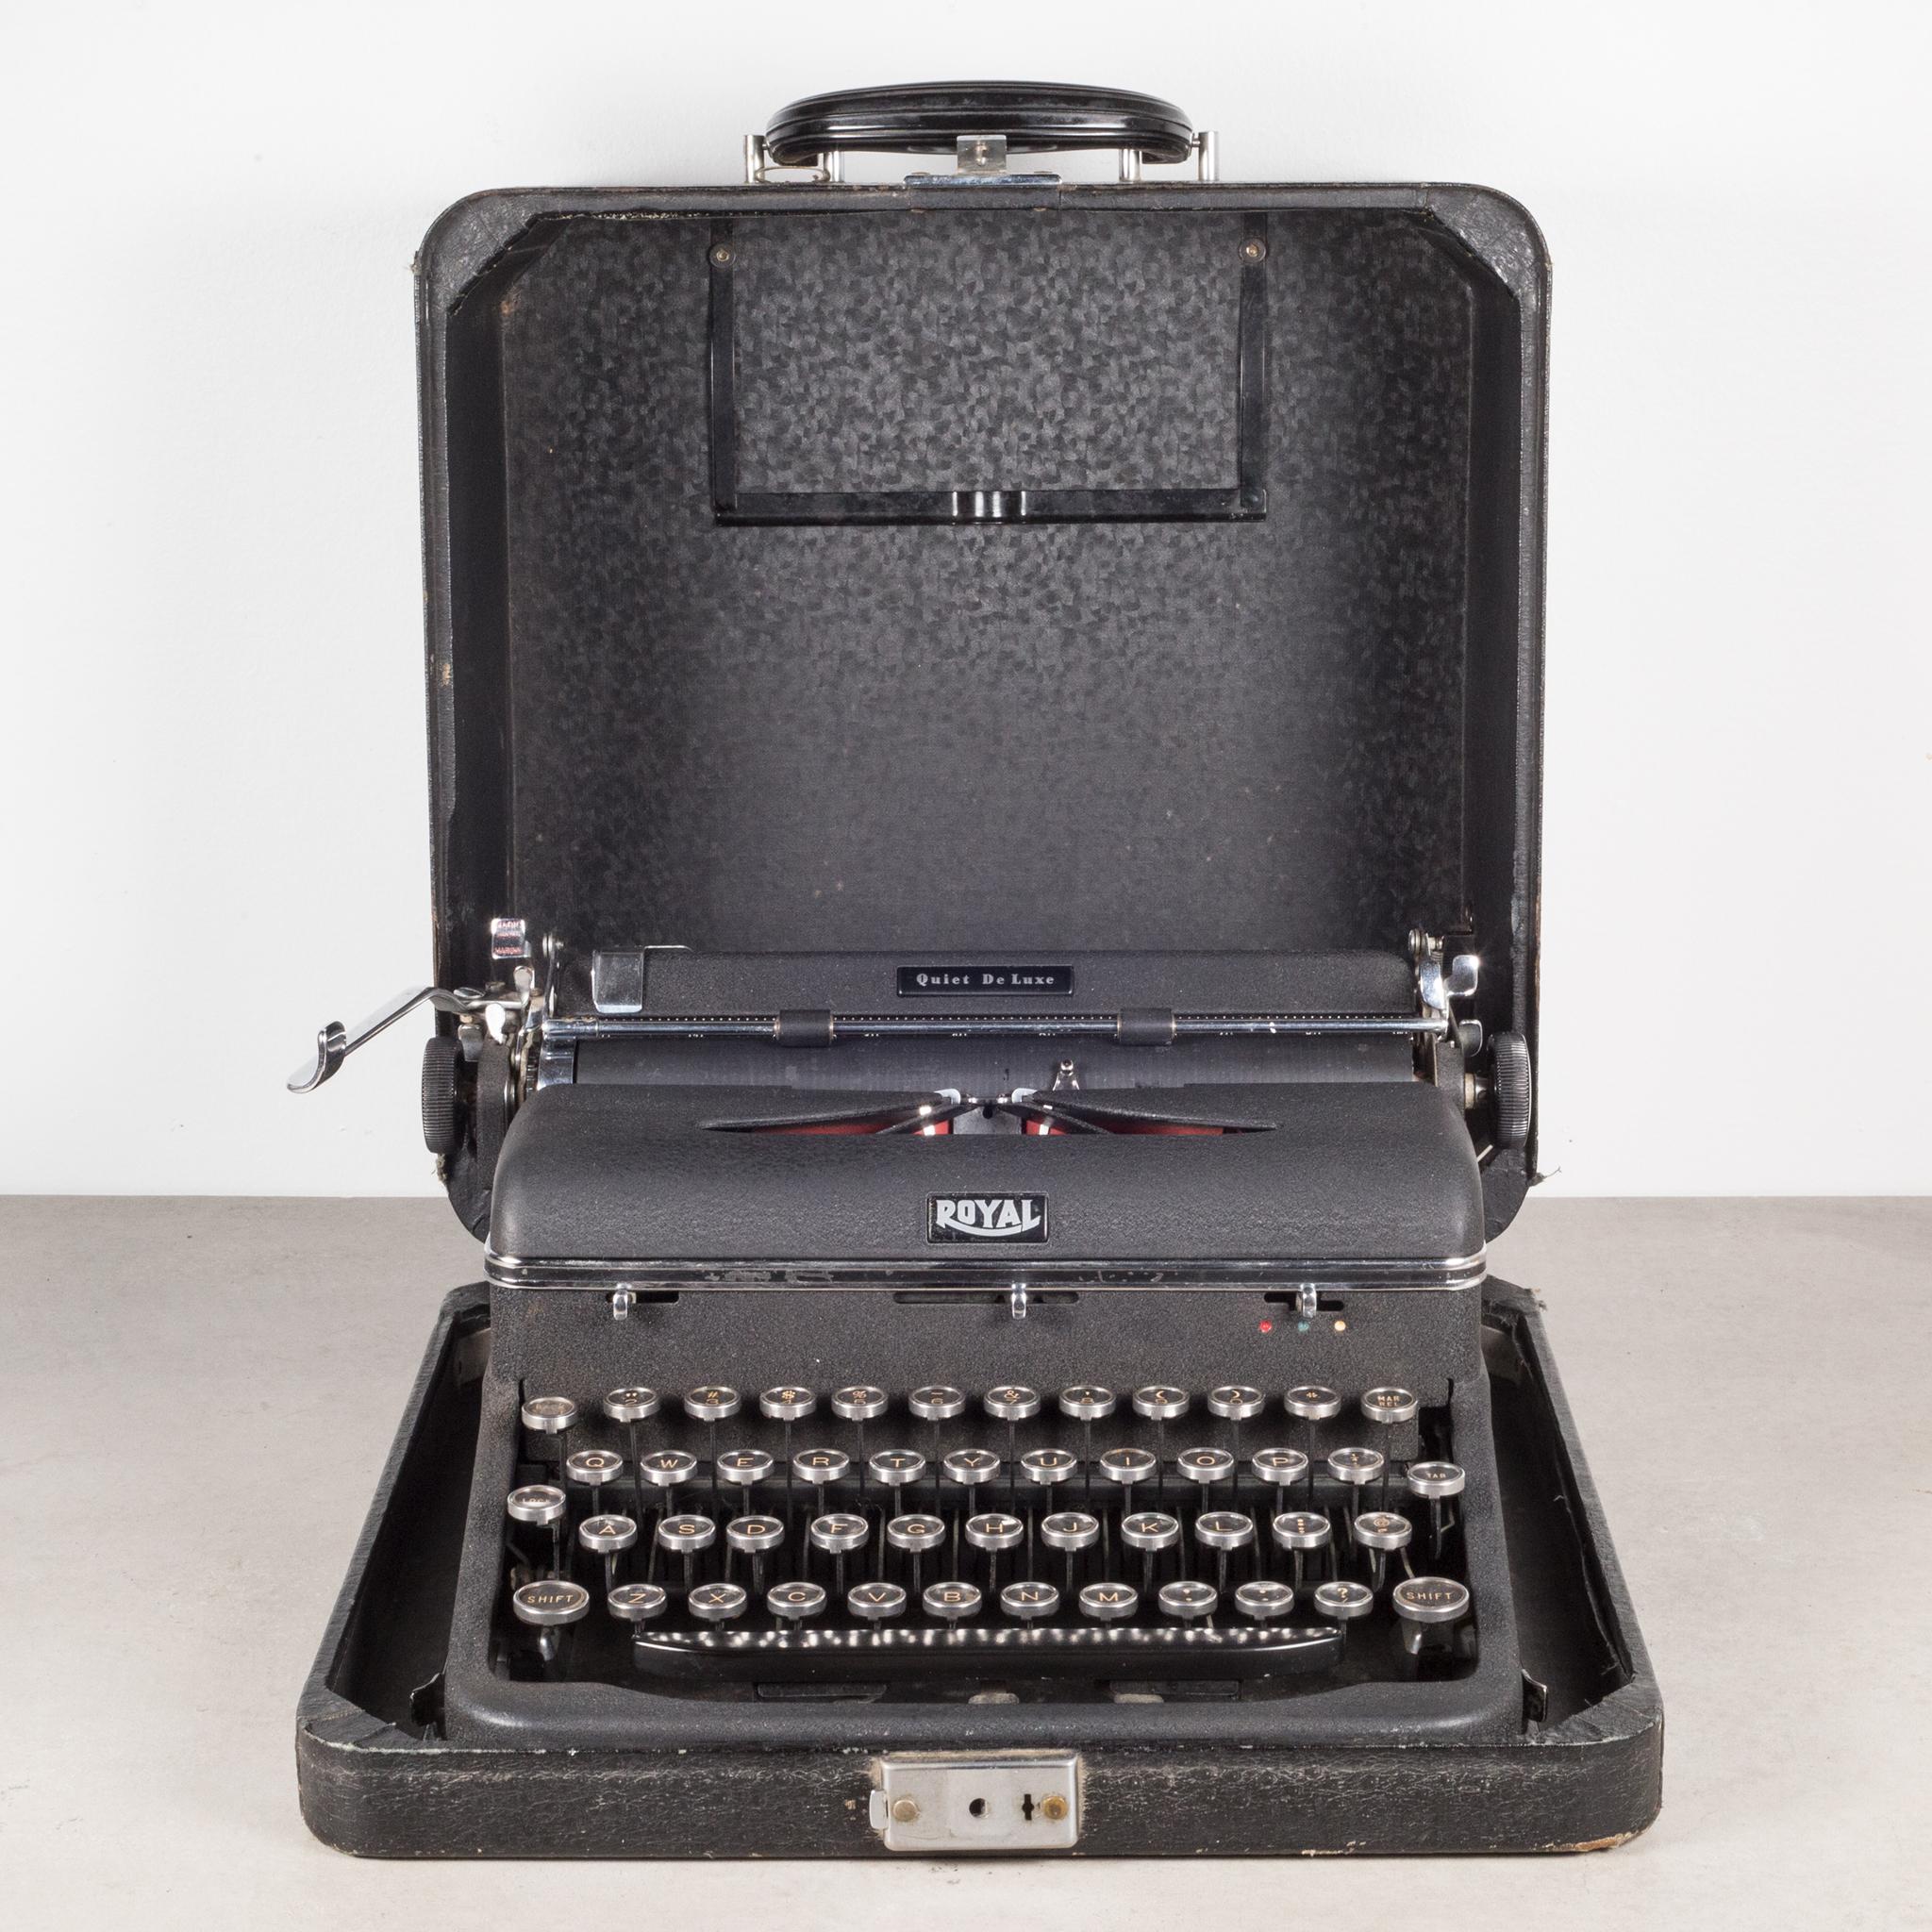 About

An antique fully refurbished and very clean Royal Quiet DeLuxe typewriter with black, crinkle finish and original case. The keys are nickel and glass with gold letters on black background. The case has a Bakelite handle. Serial number: